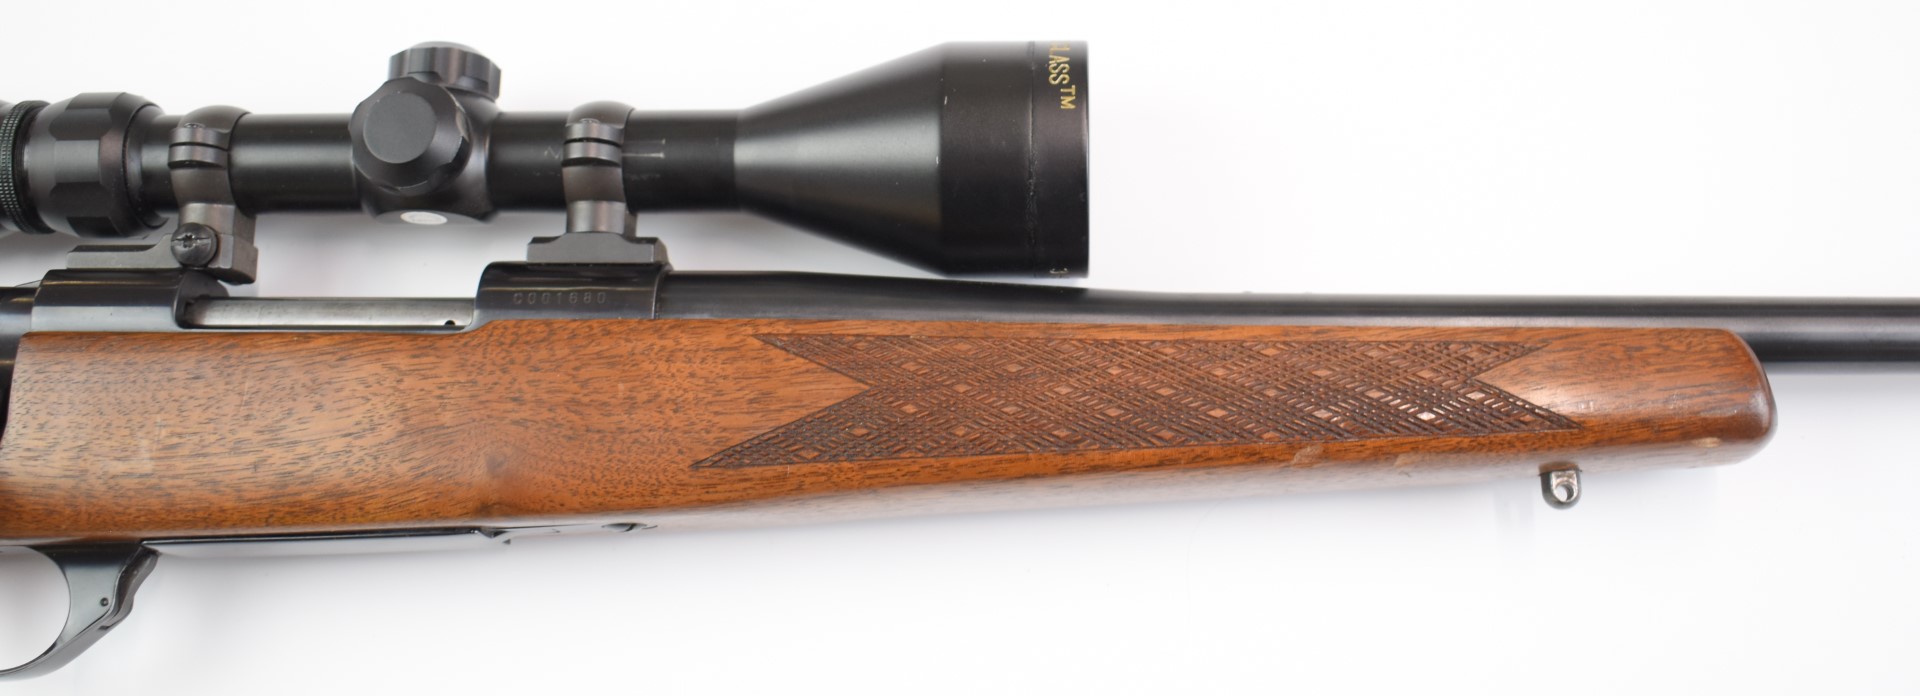 RWS Model 89 .22-250 bolt action rifle with textured semi-pistol grip and forend, raised cheek- - Image 8 of 20